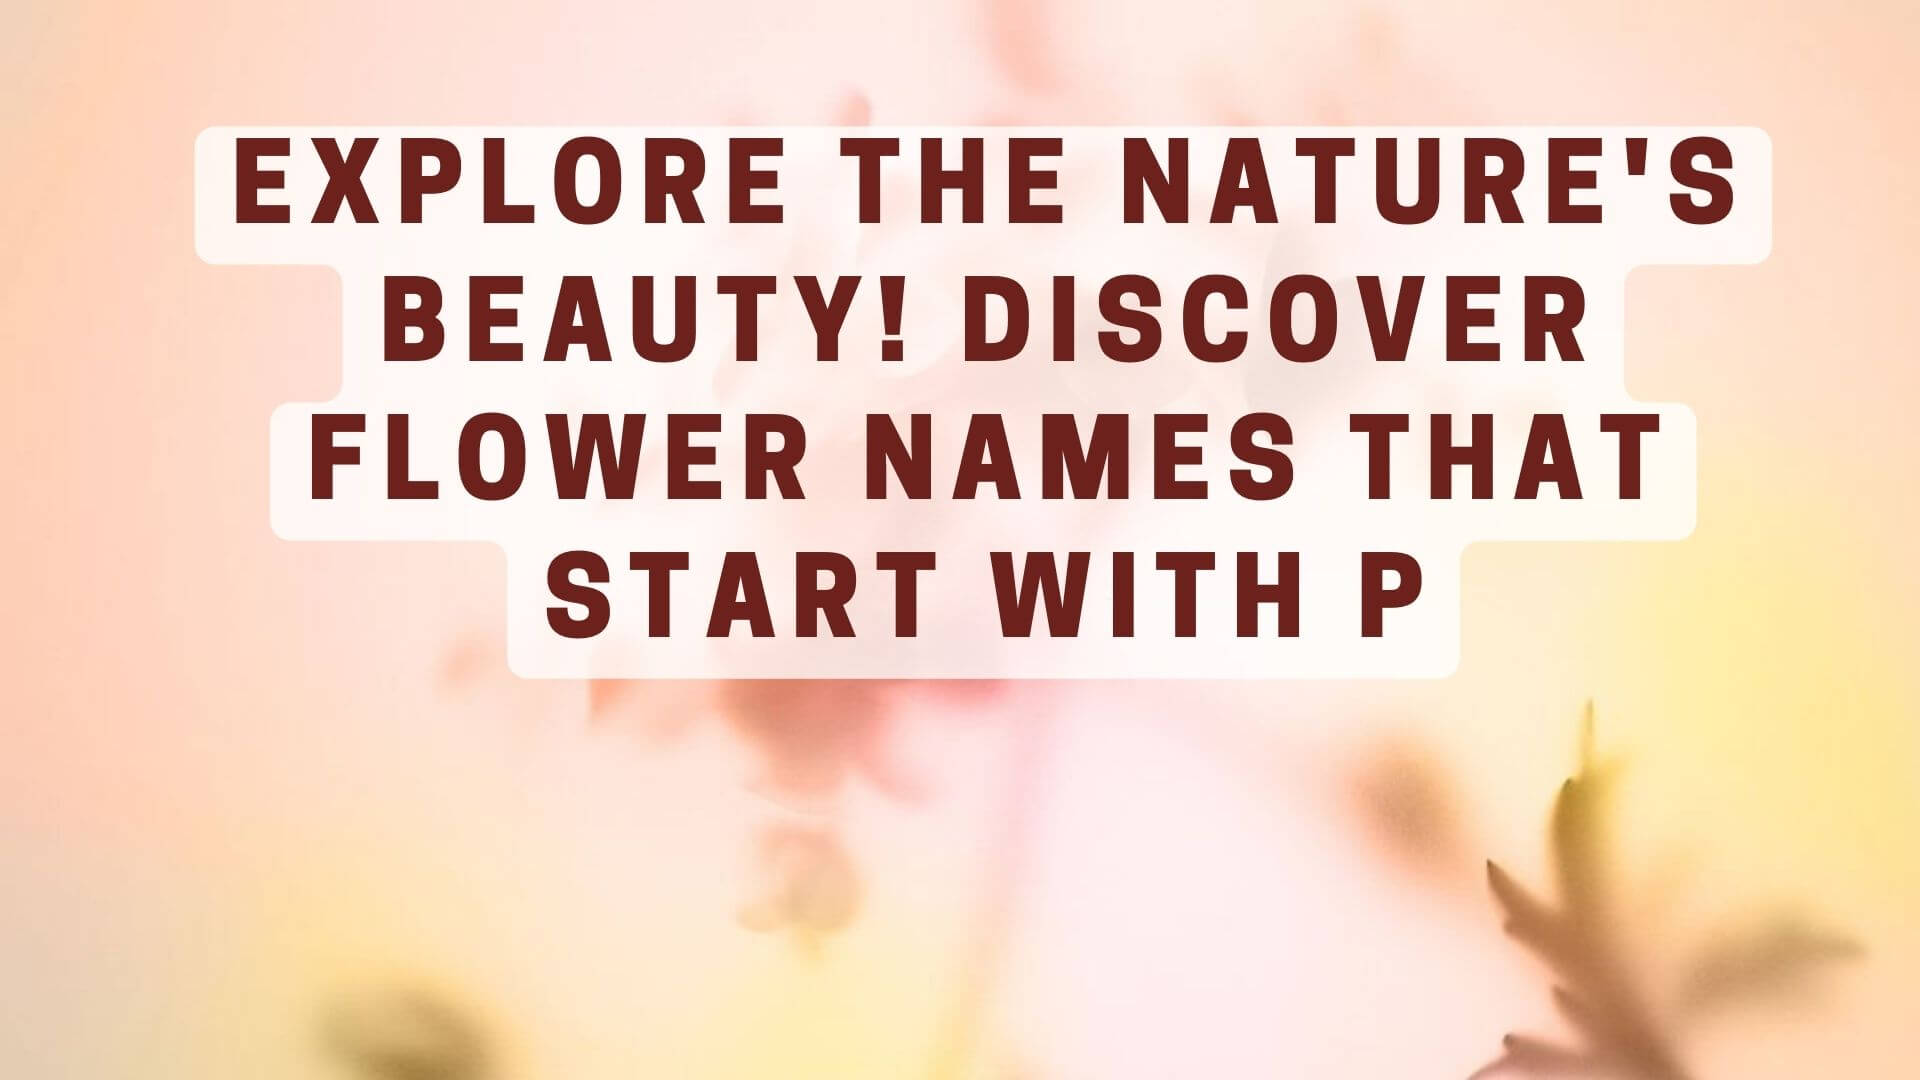 Explore the Nature's Beauty! Discover Flower Names that Start with P